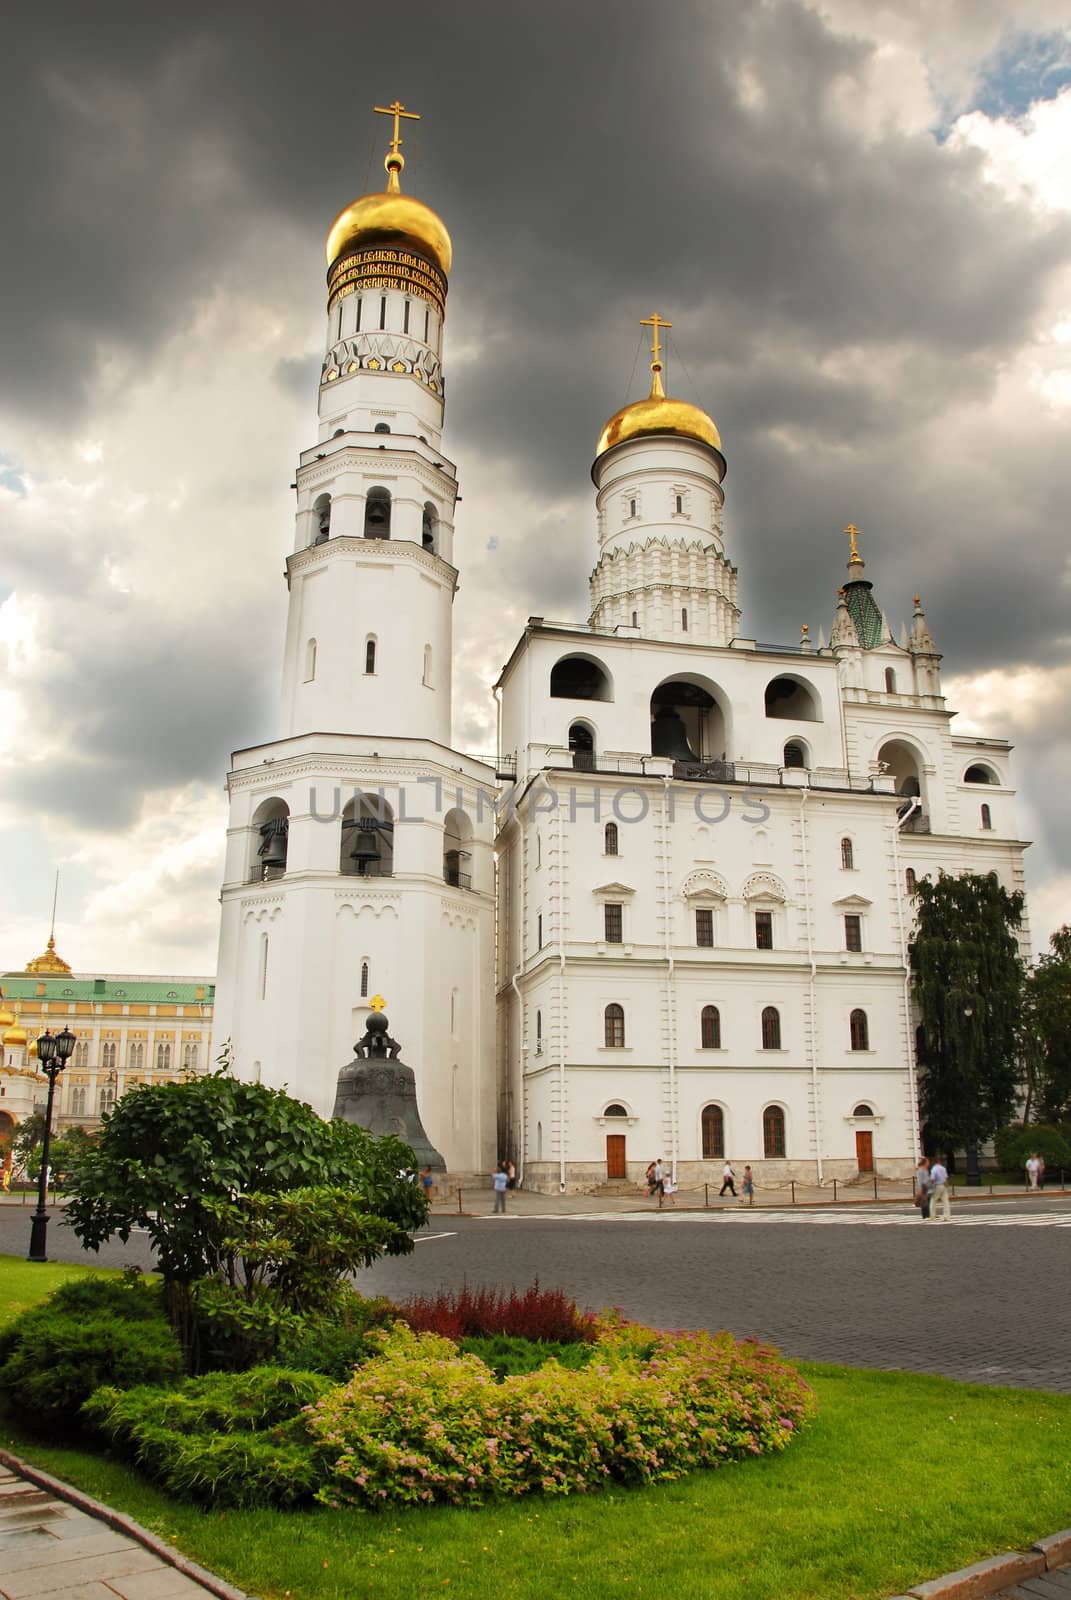 The Ivan the Great Bell Tower and Assumption Belfry in Moscow Kremlin over dramatic cloudy sky